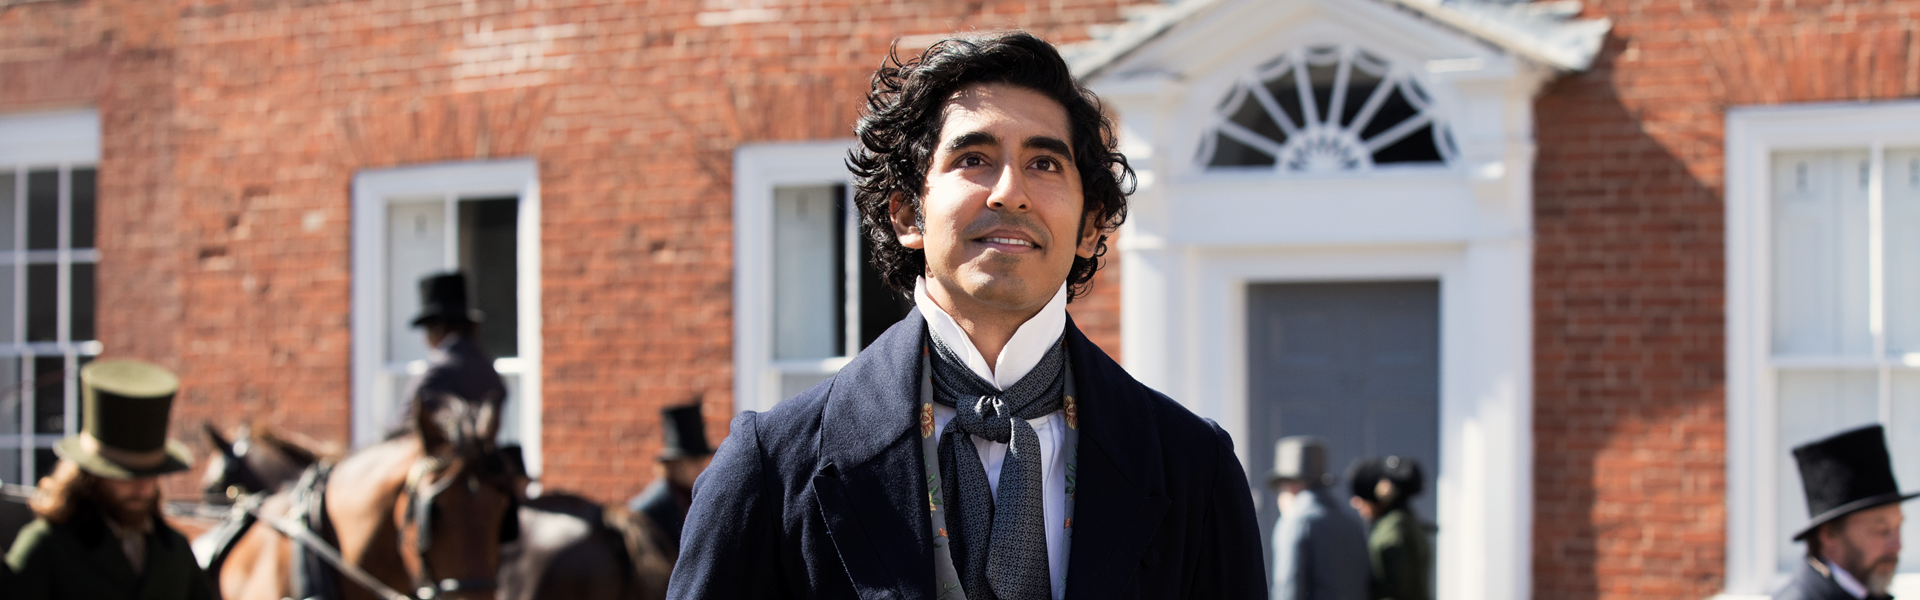 FILM: The Personal History of David Copperfield